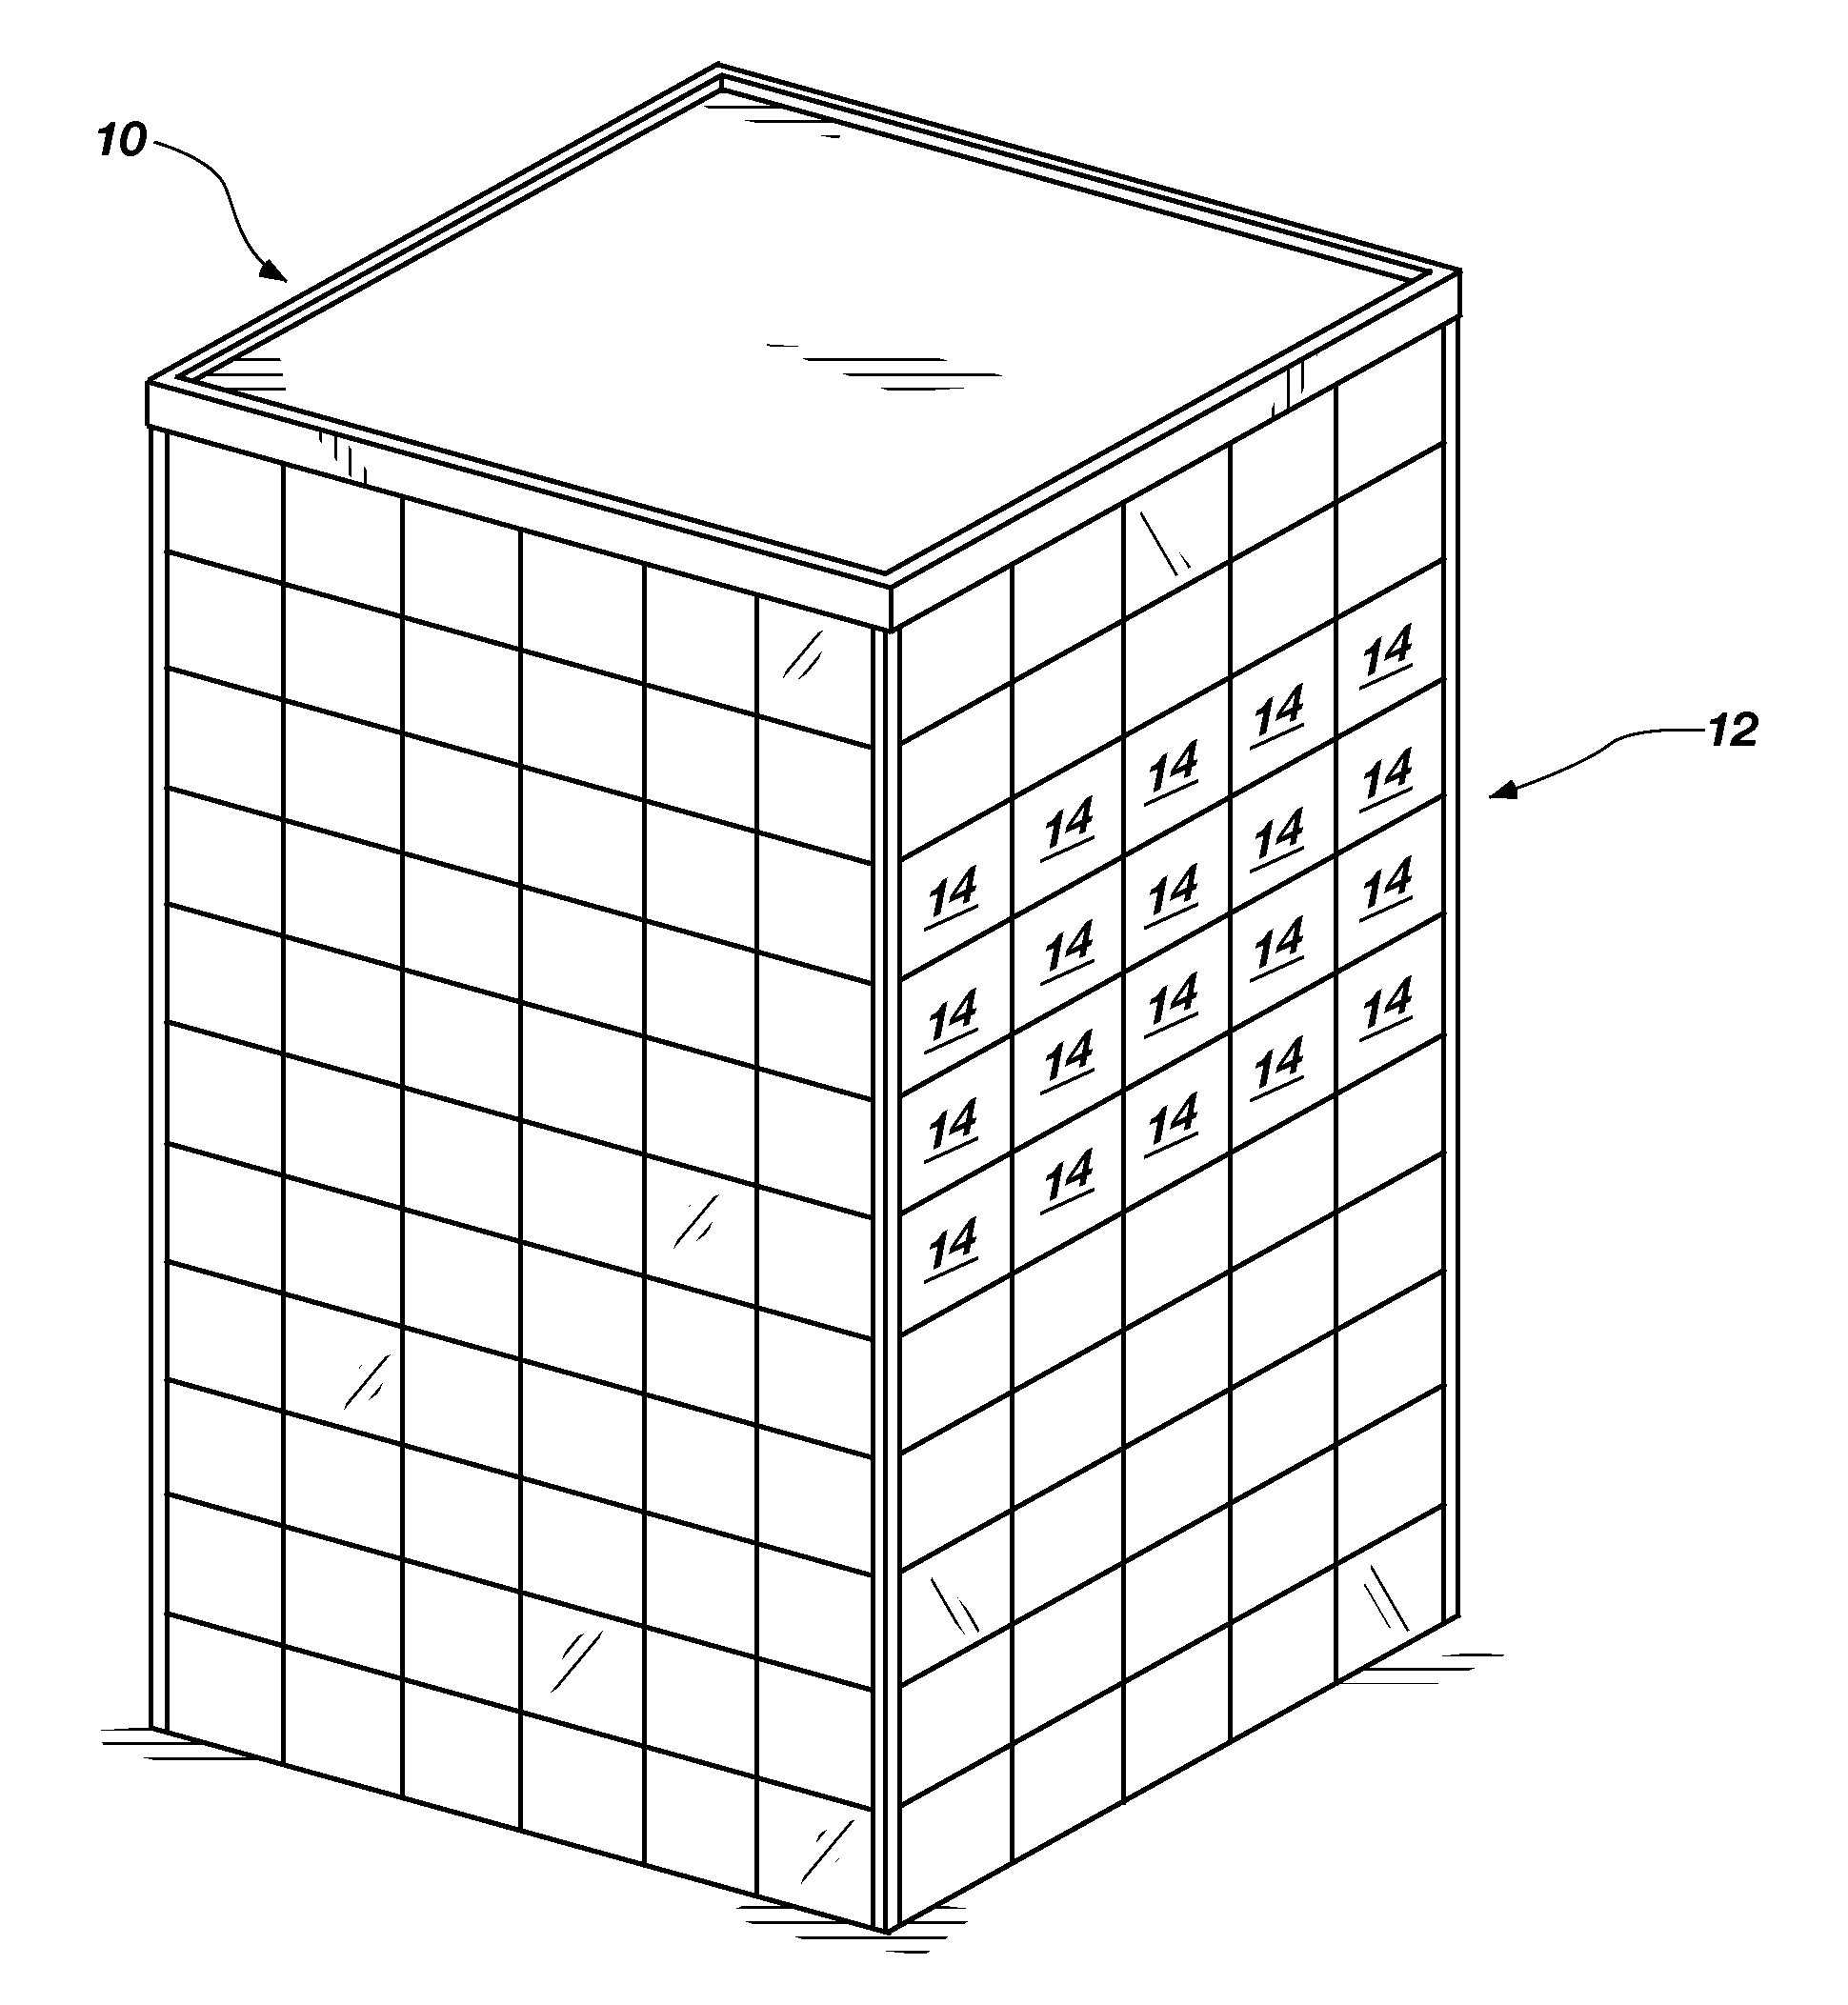 Systems, devices, and methods relating to an electronic display